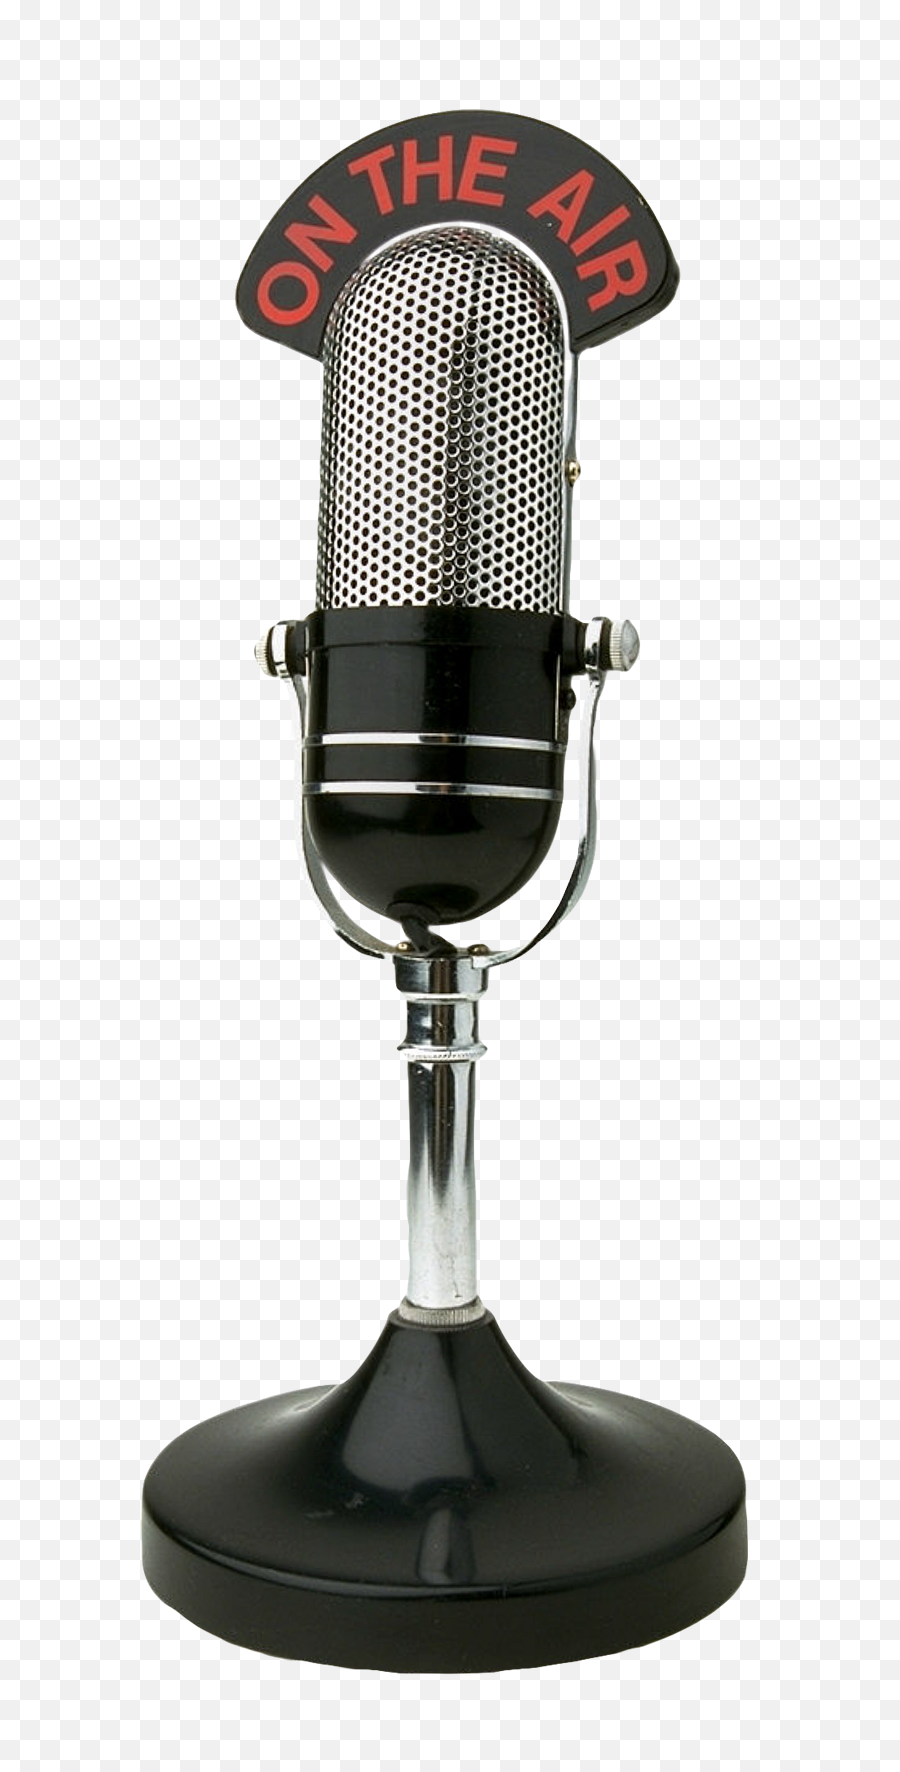 Download Free Png Microphone Transparent Image - Dlpngcom Radio Mic Png,Microphone Stand Png